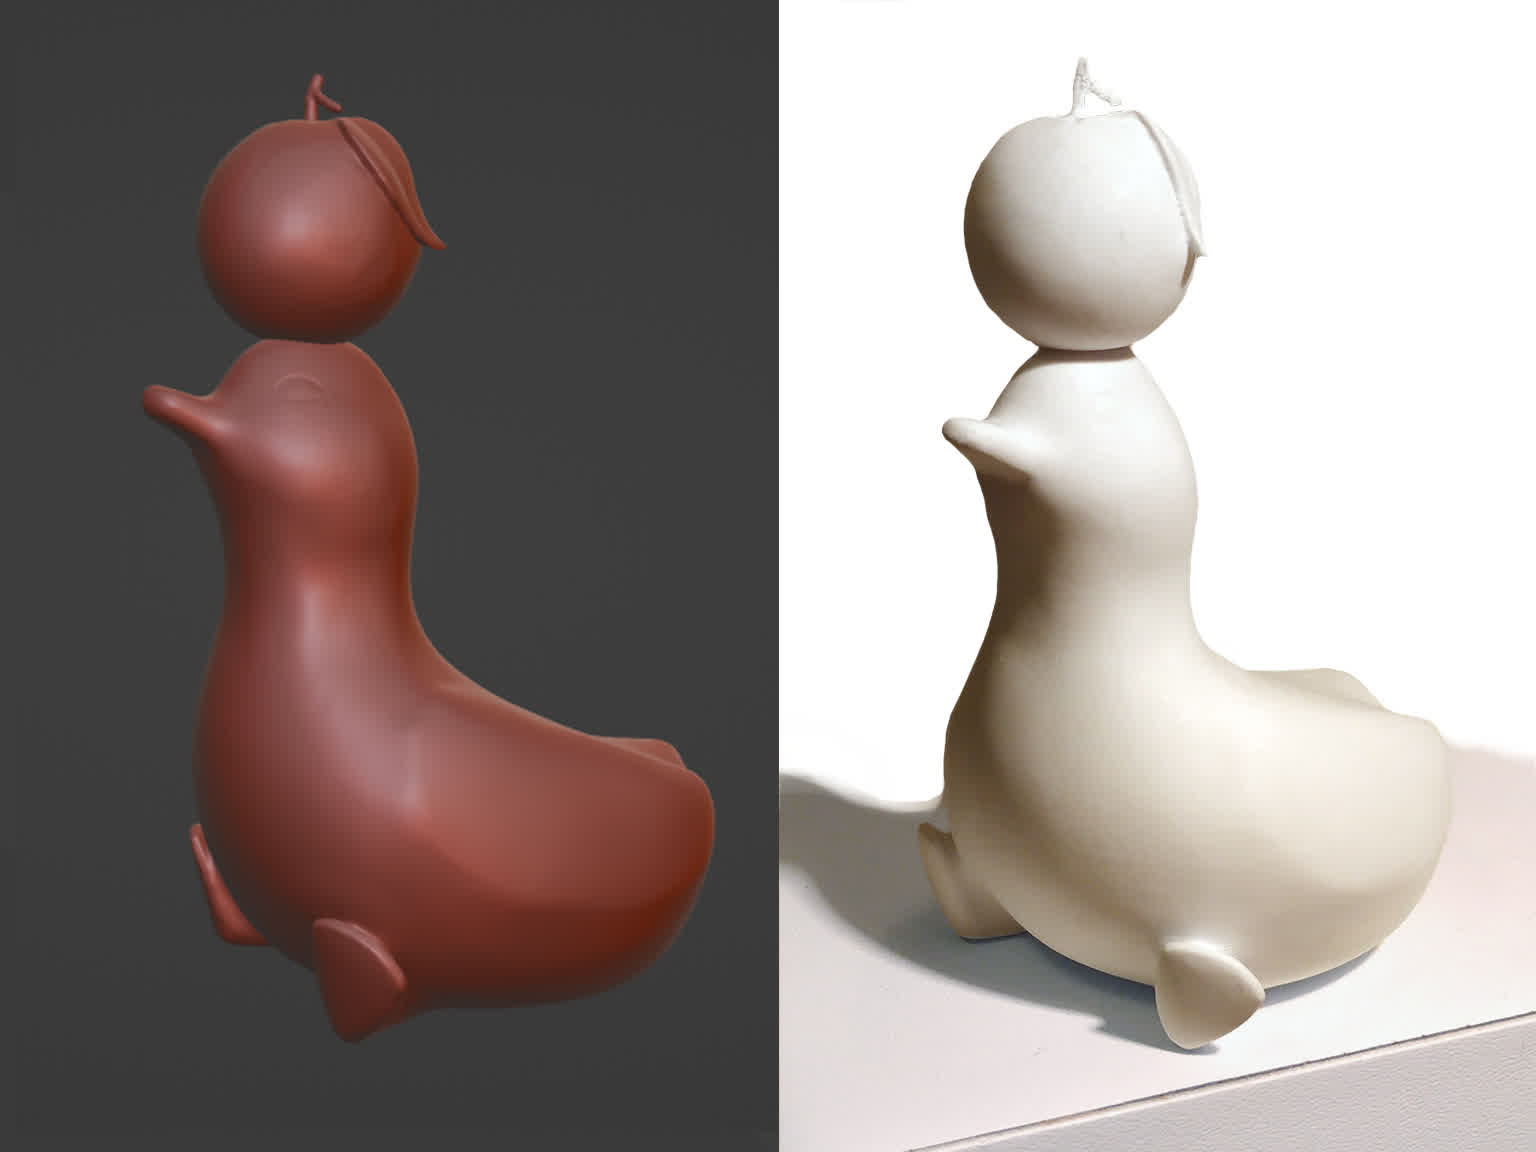 Thumbnail image: A screenshot from Blender of a clay-coloured sculpture of a duck balancing an orange on its head. On the right, a 3D printed version